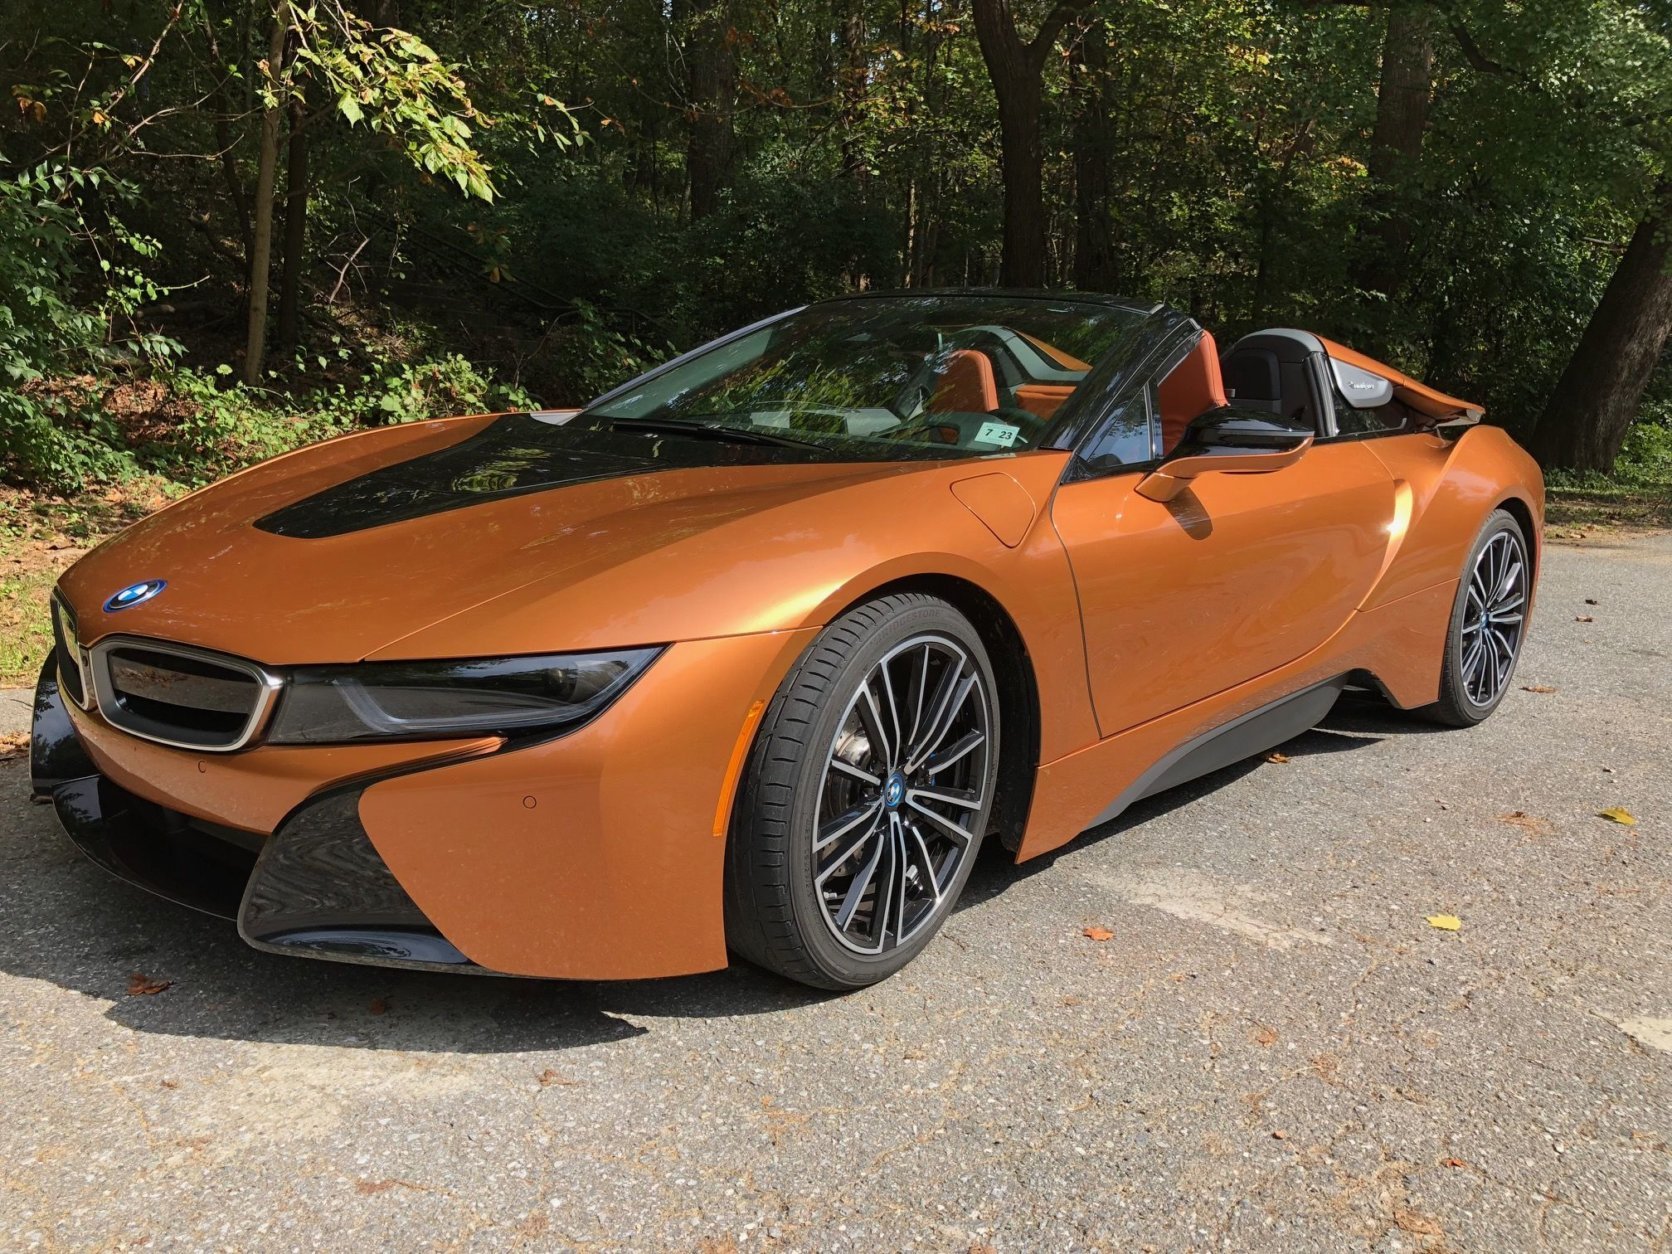 The i8 looks like it was designed to cheat the wind and do so without big wings and spoilers. (WTOP/Mike Parris)